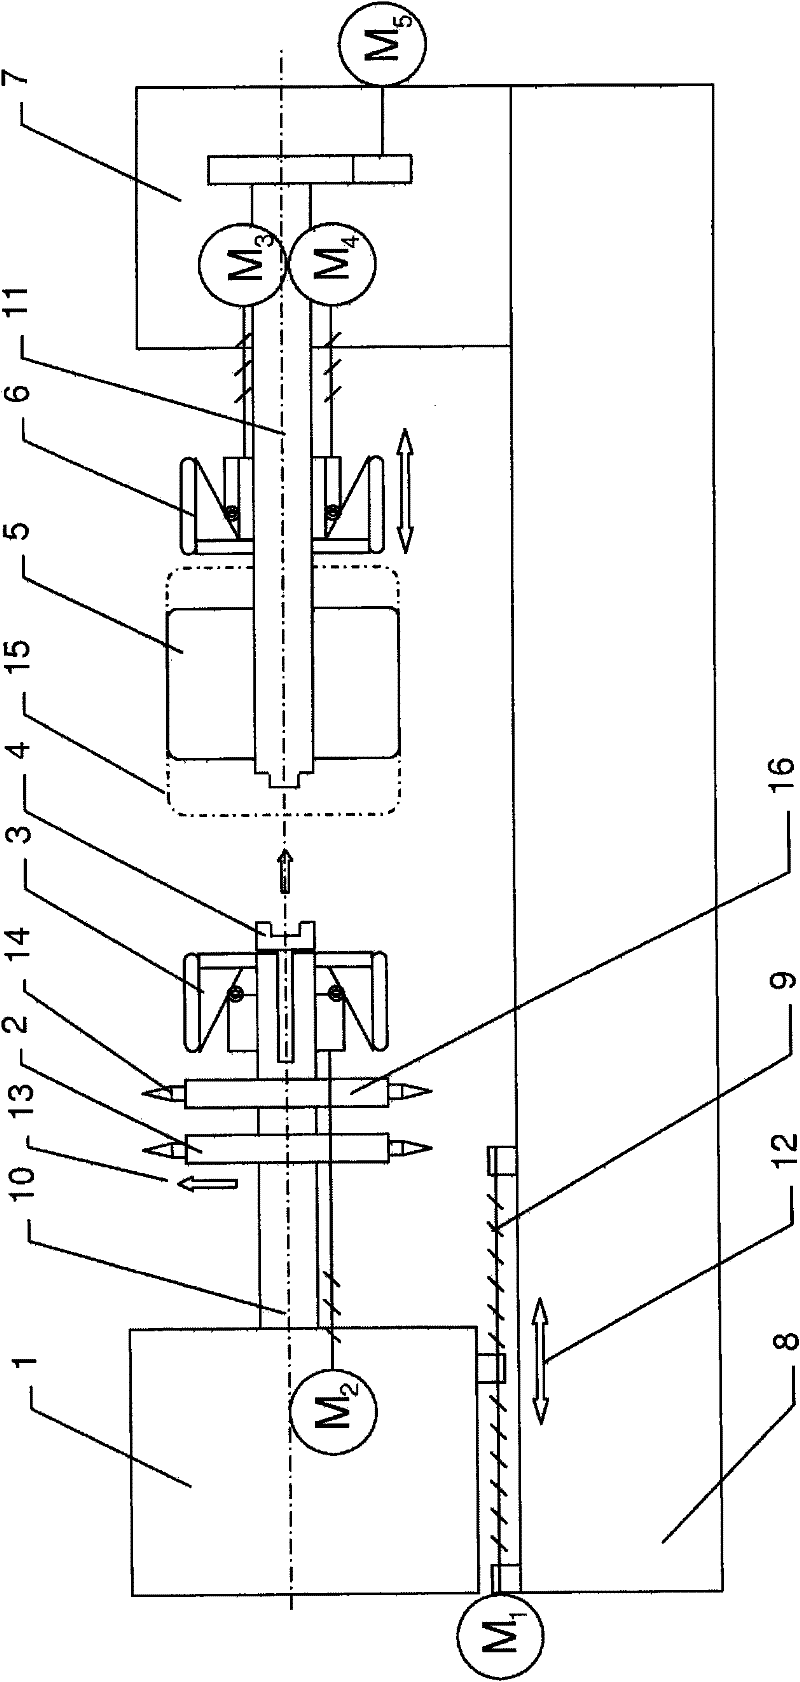 Device for constructing a carcass for a vehicle tire